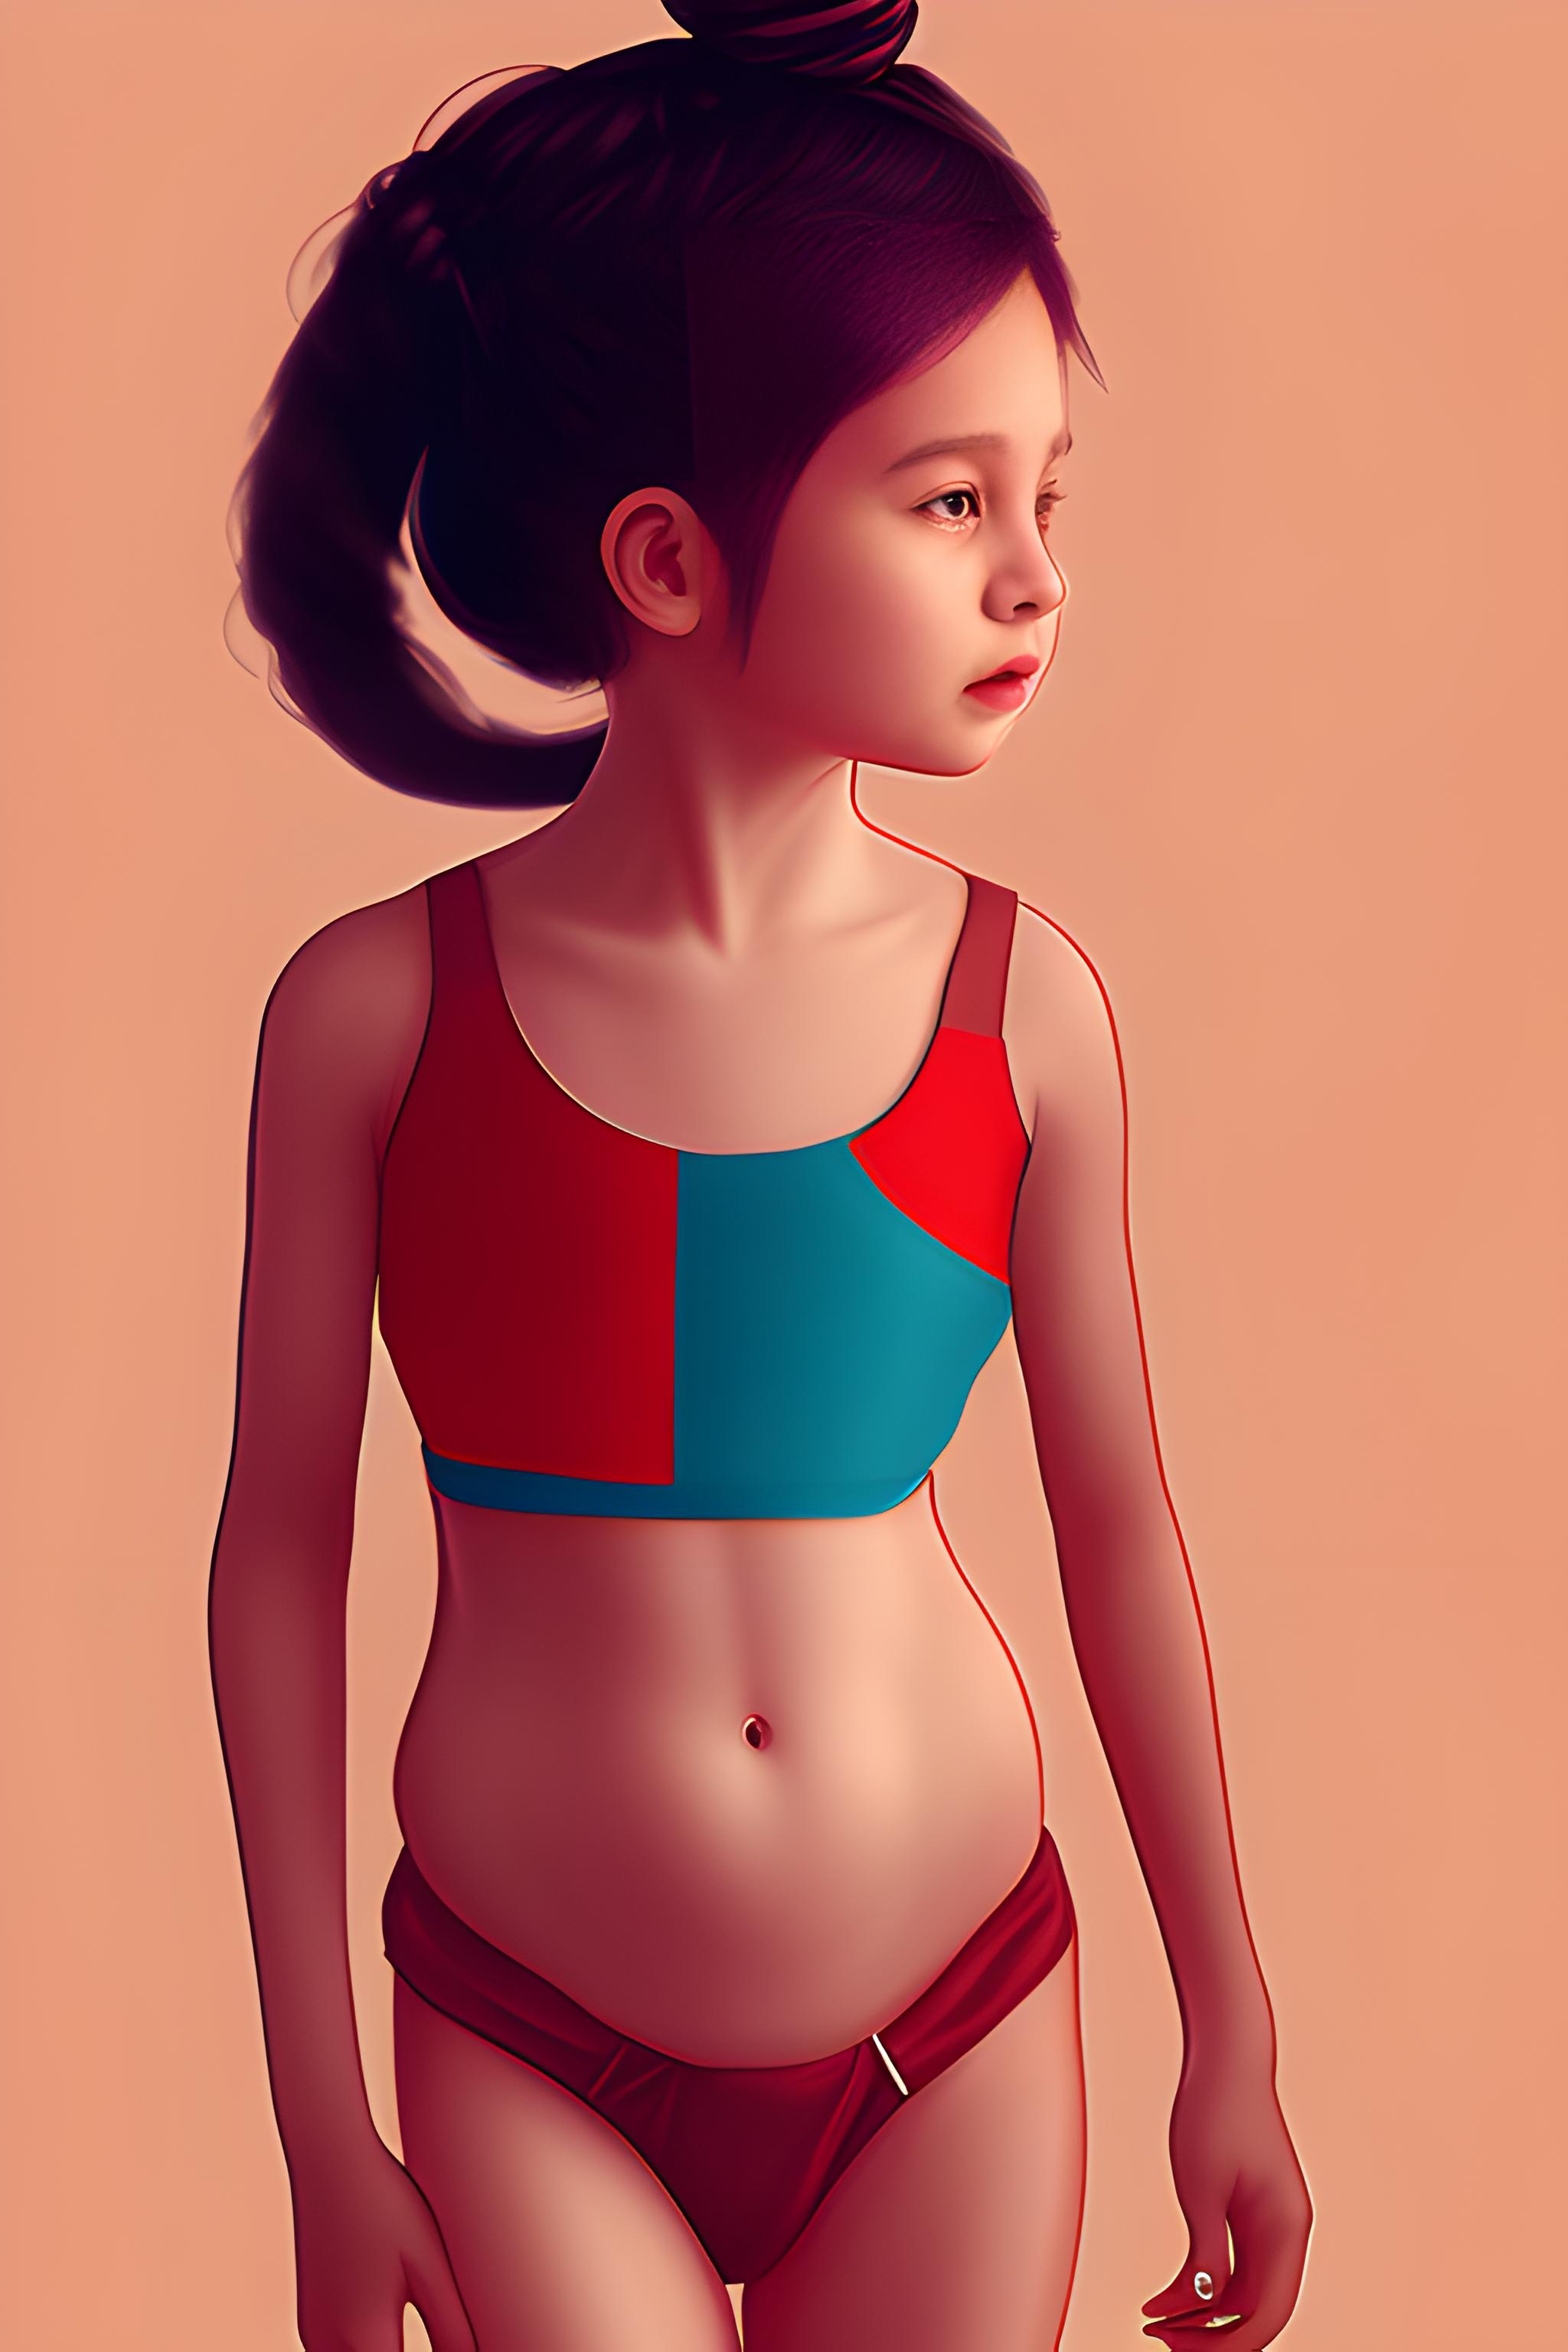 A child that is a girl wearing a tight bra and a red thong